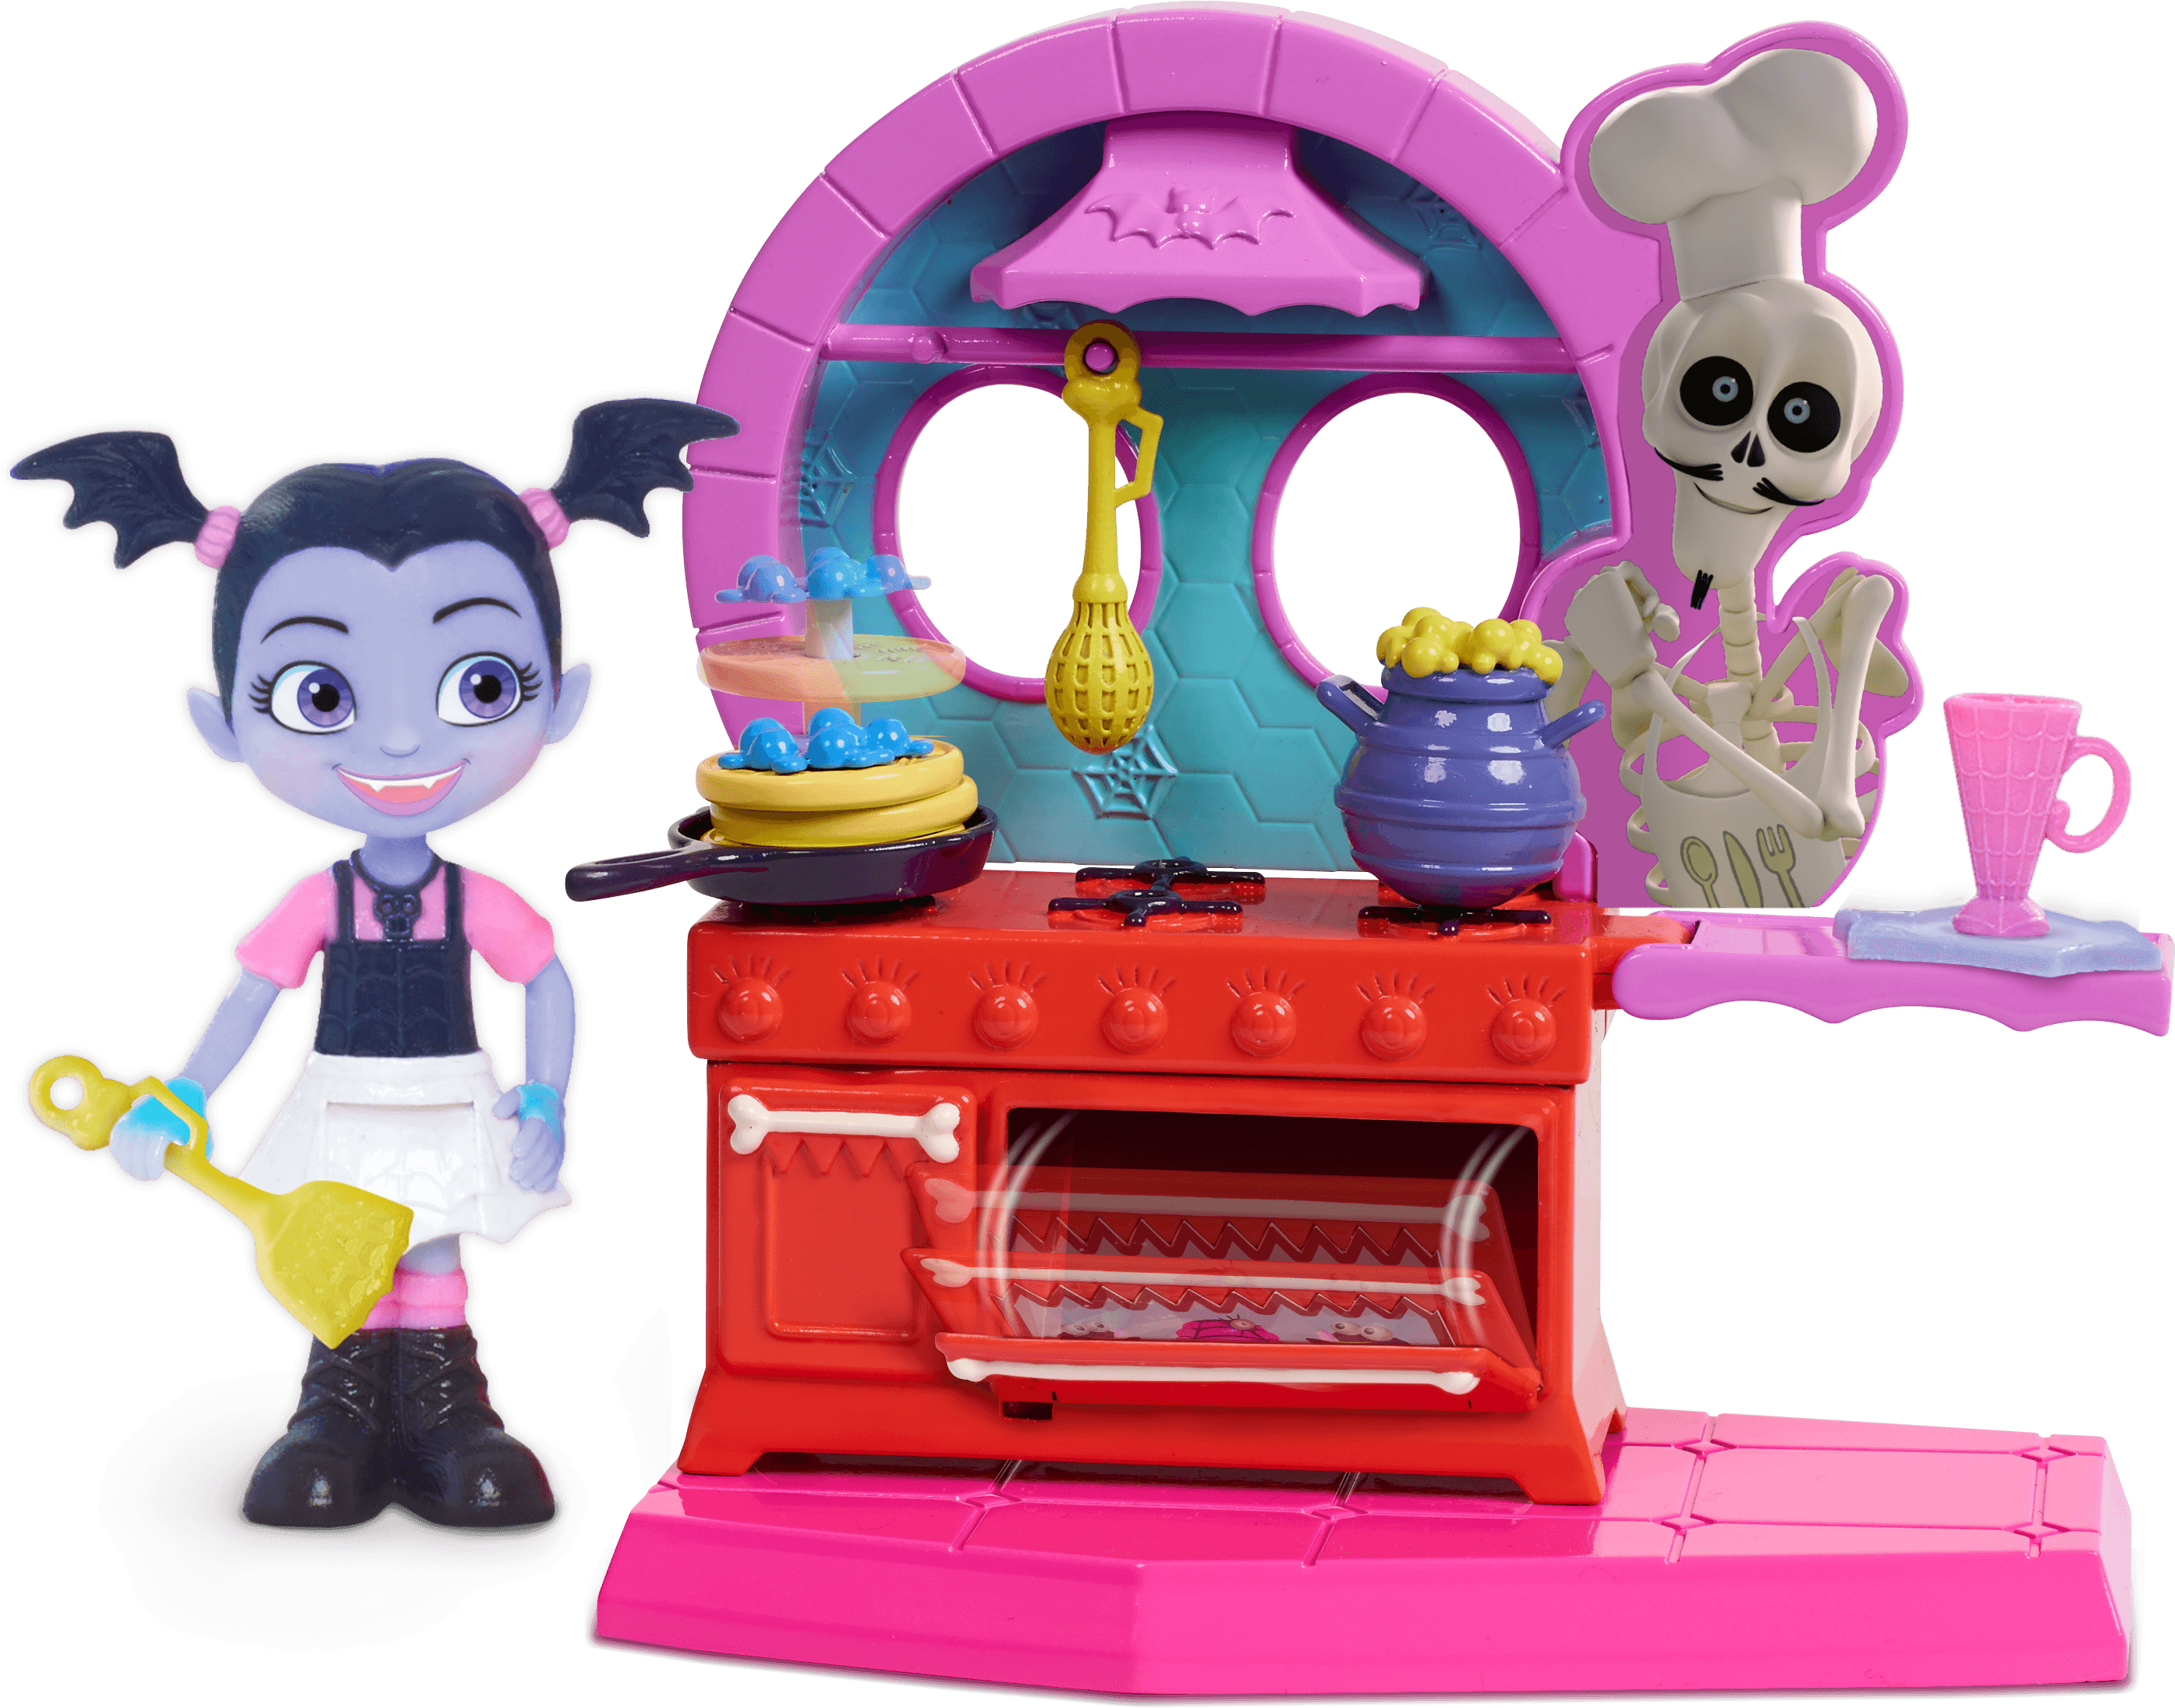 A Toy Kitchen Set With A Couple Of Girls